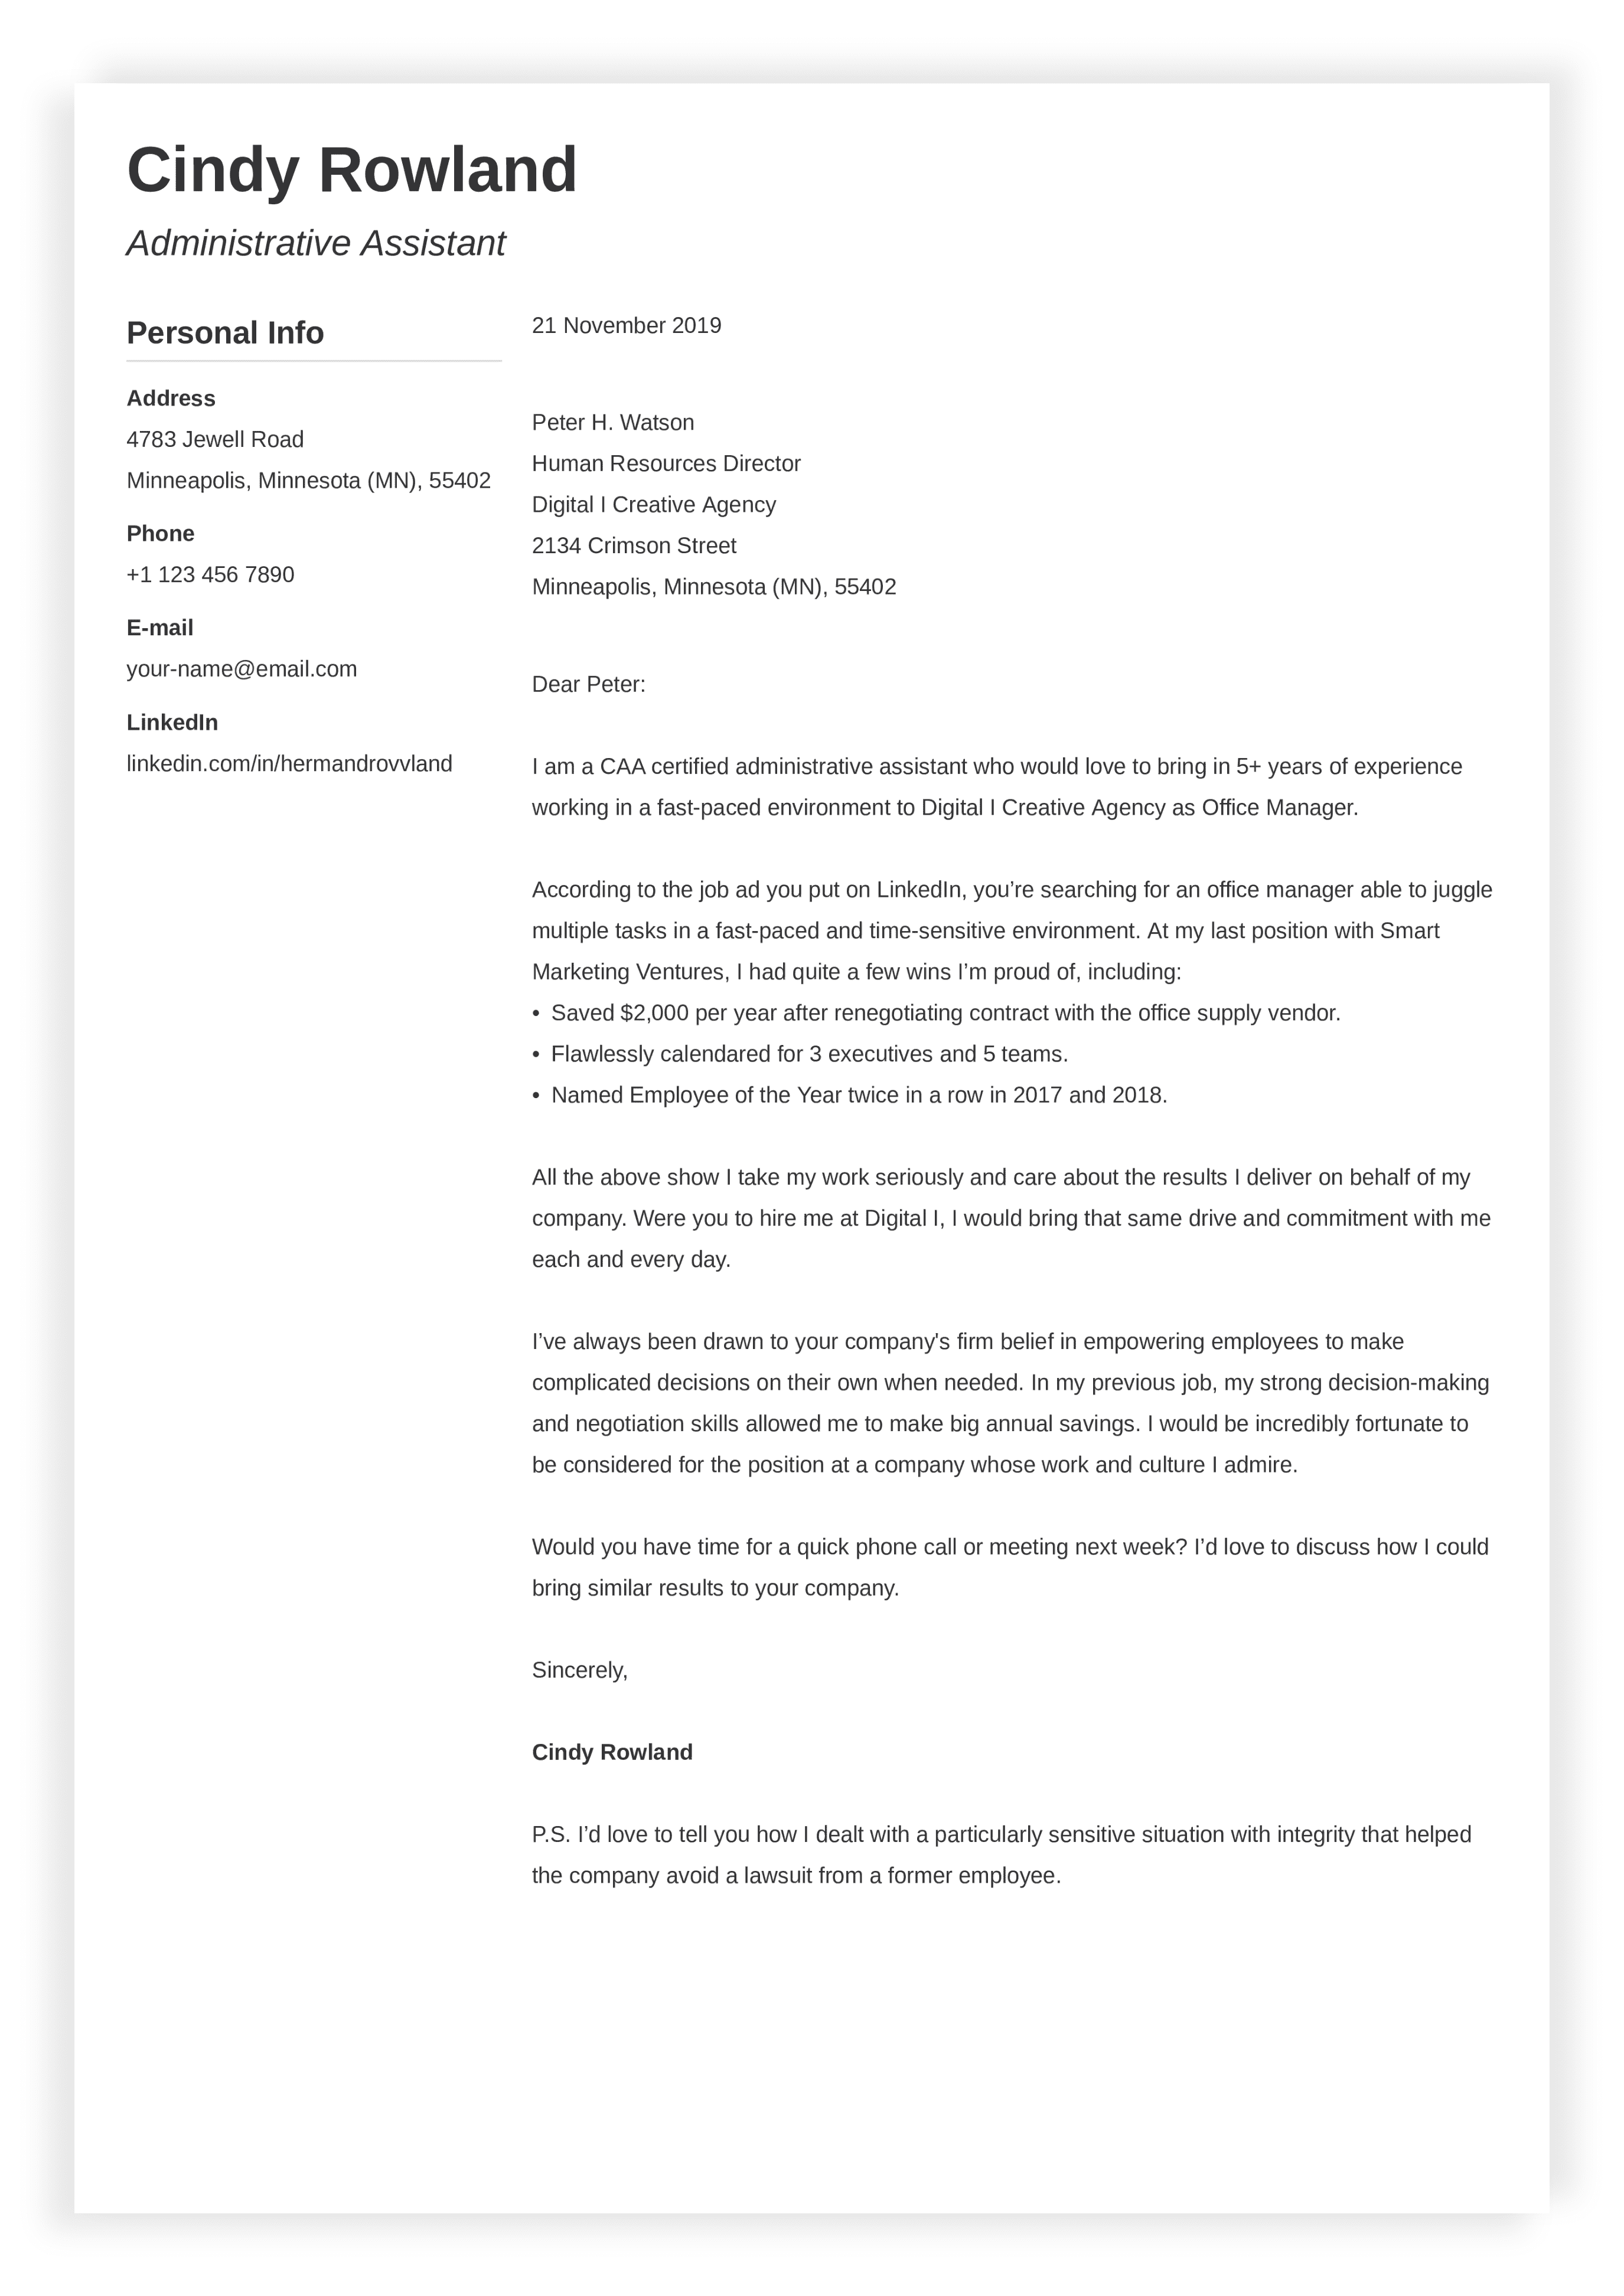 Do online resumes need a cover letter